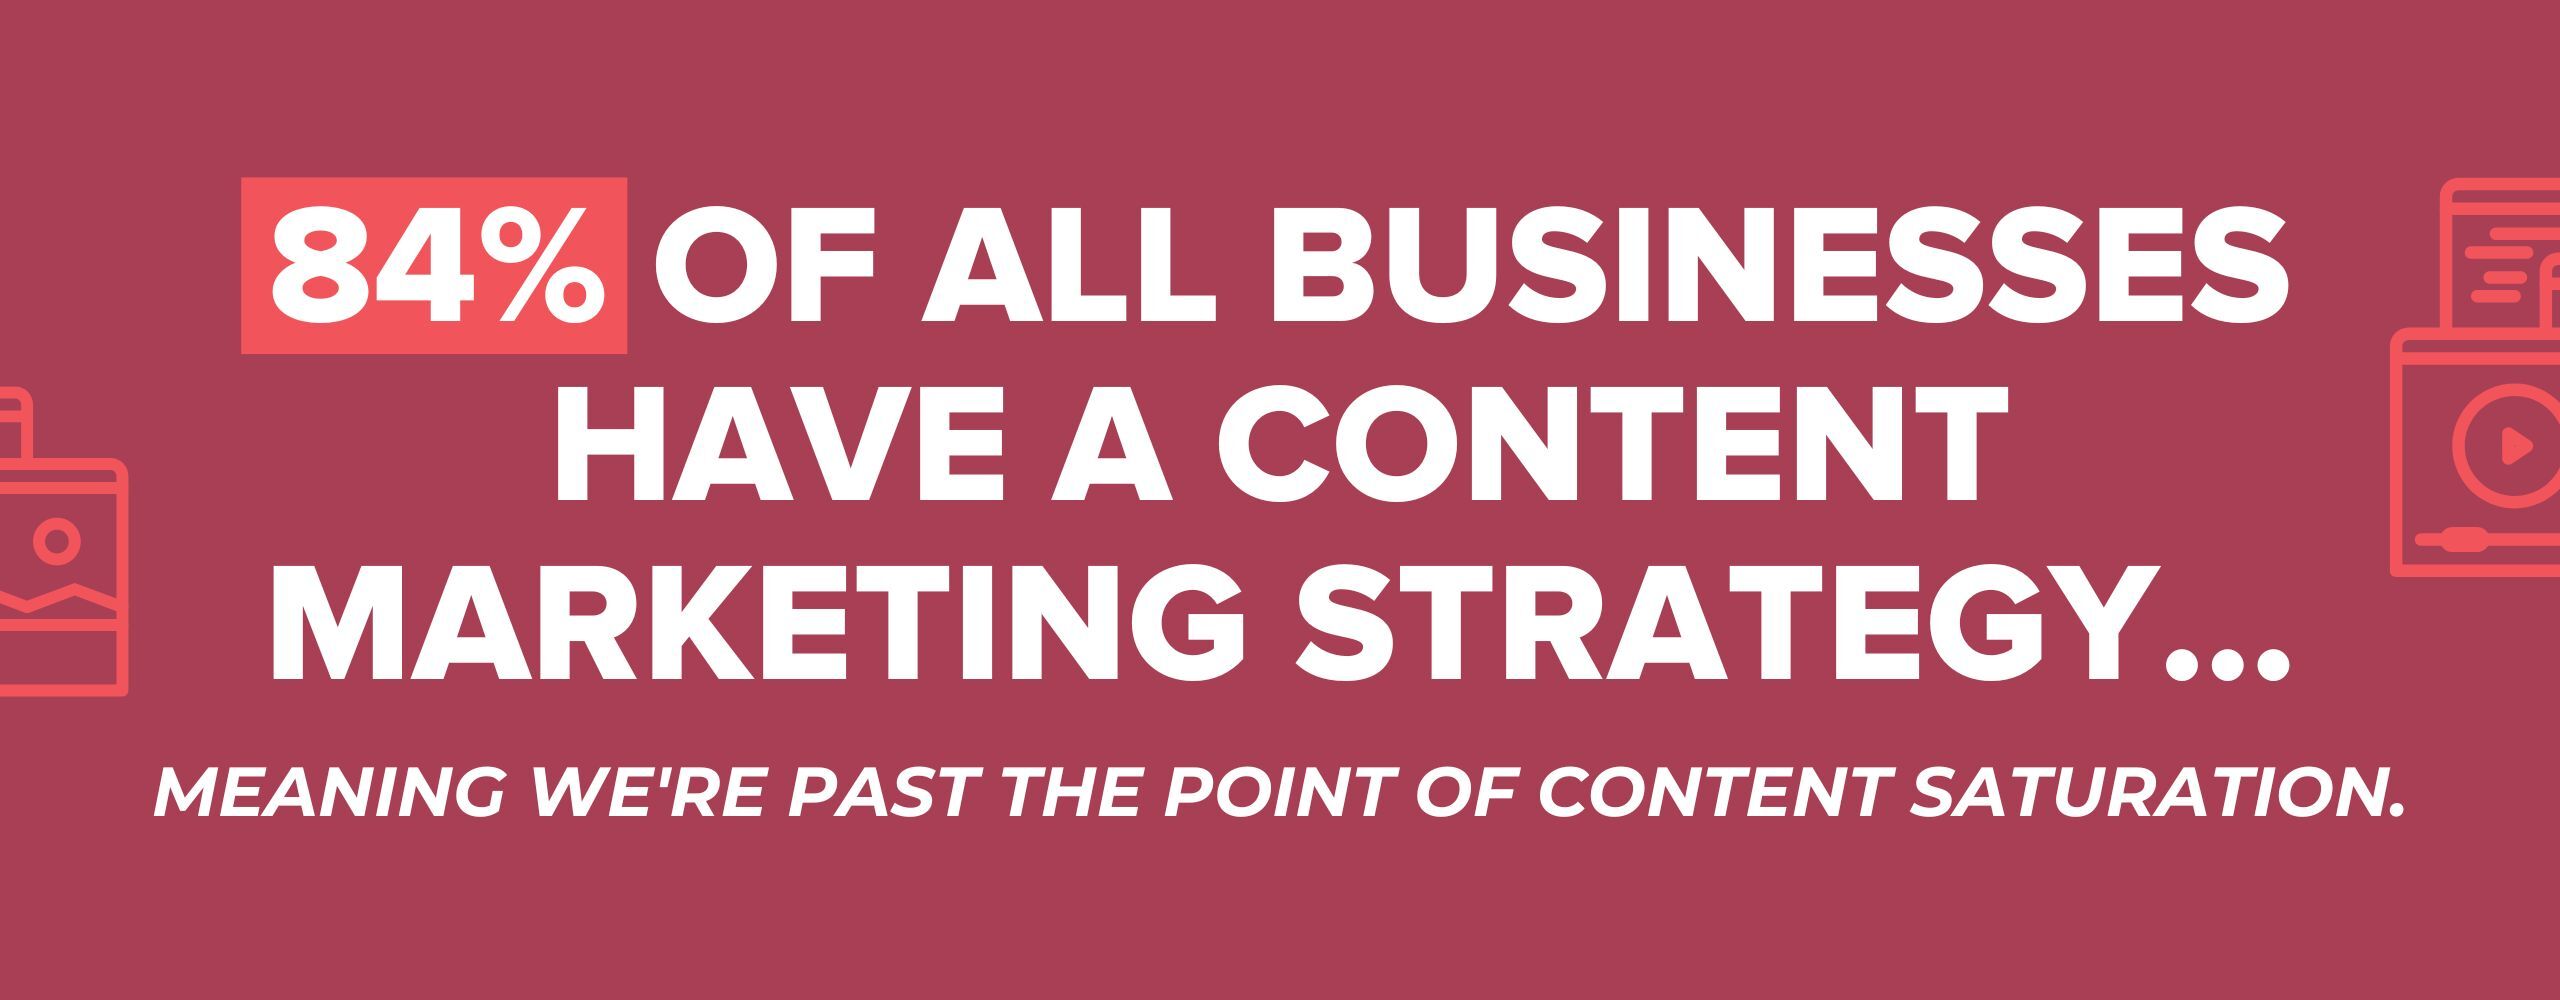 Most-businesses-content-strategy